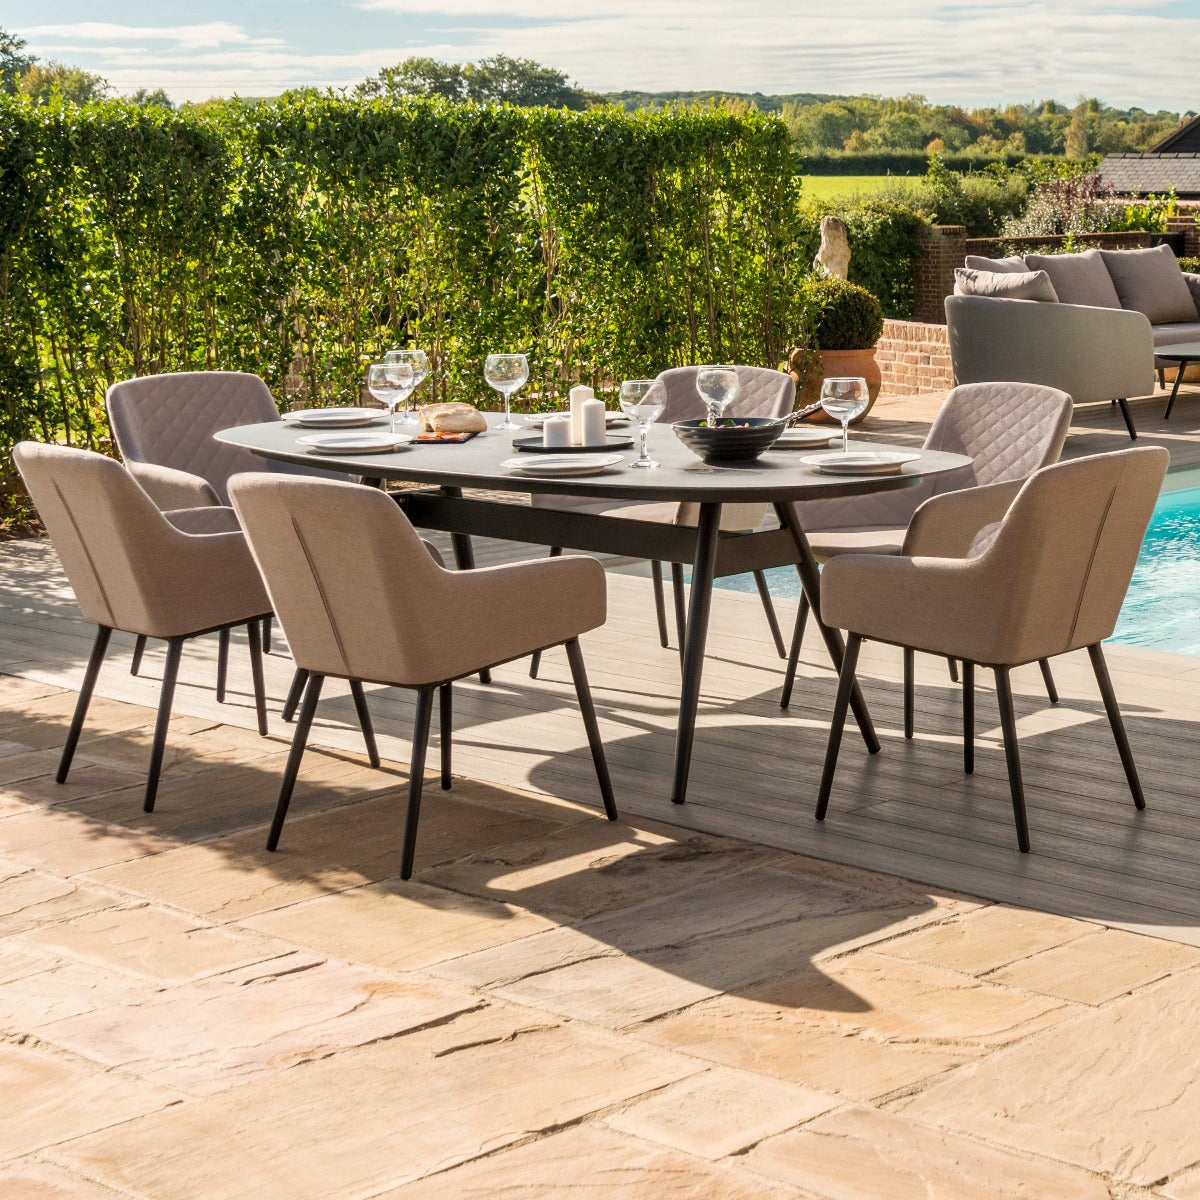 Maze - Outdoor Fabric Zest 6 Seat Oval Dining Set - Taupe